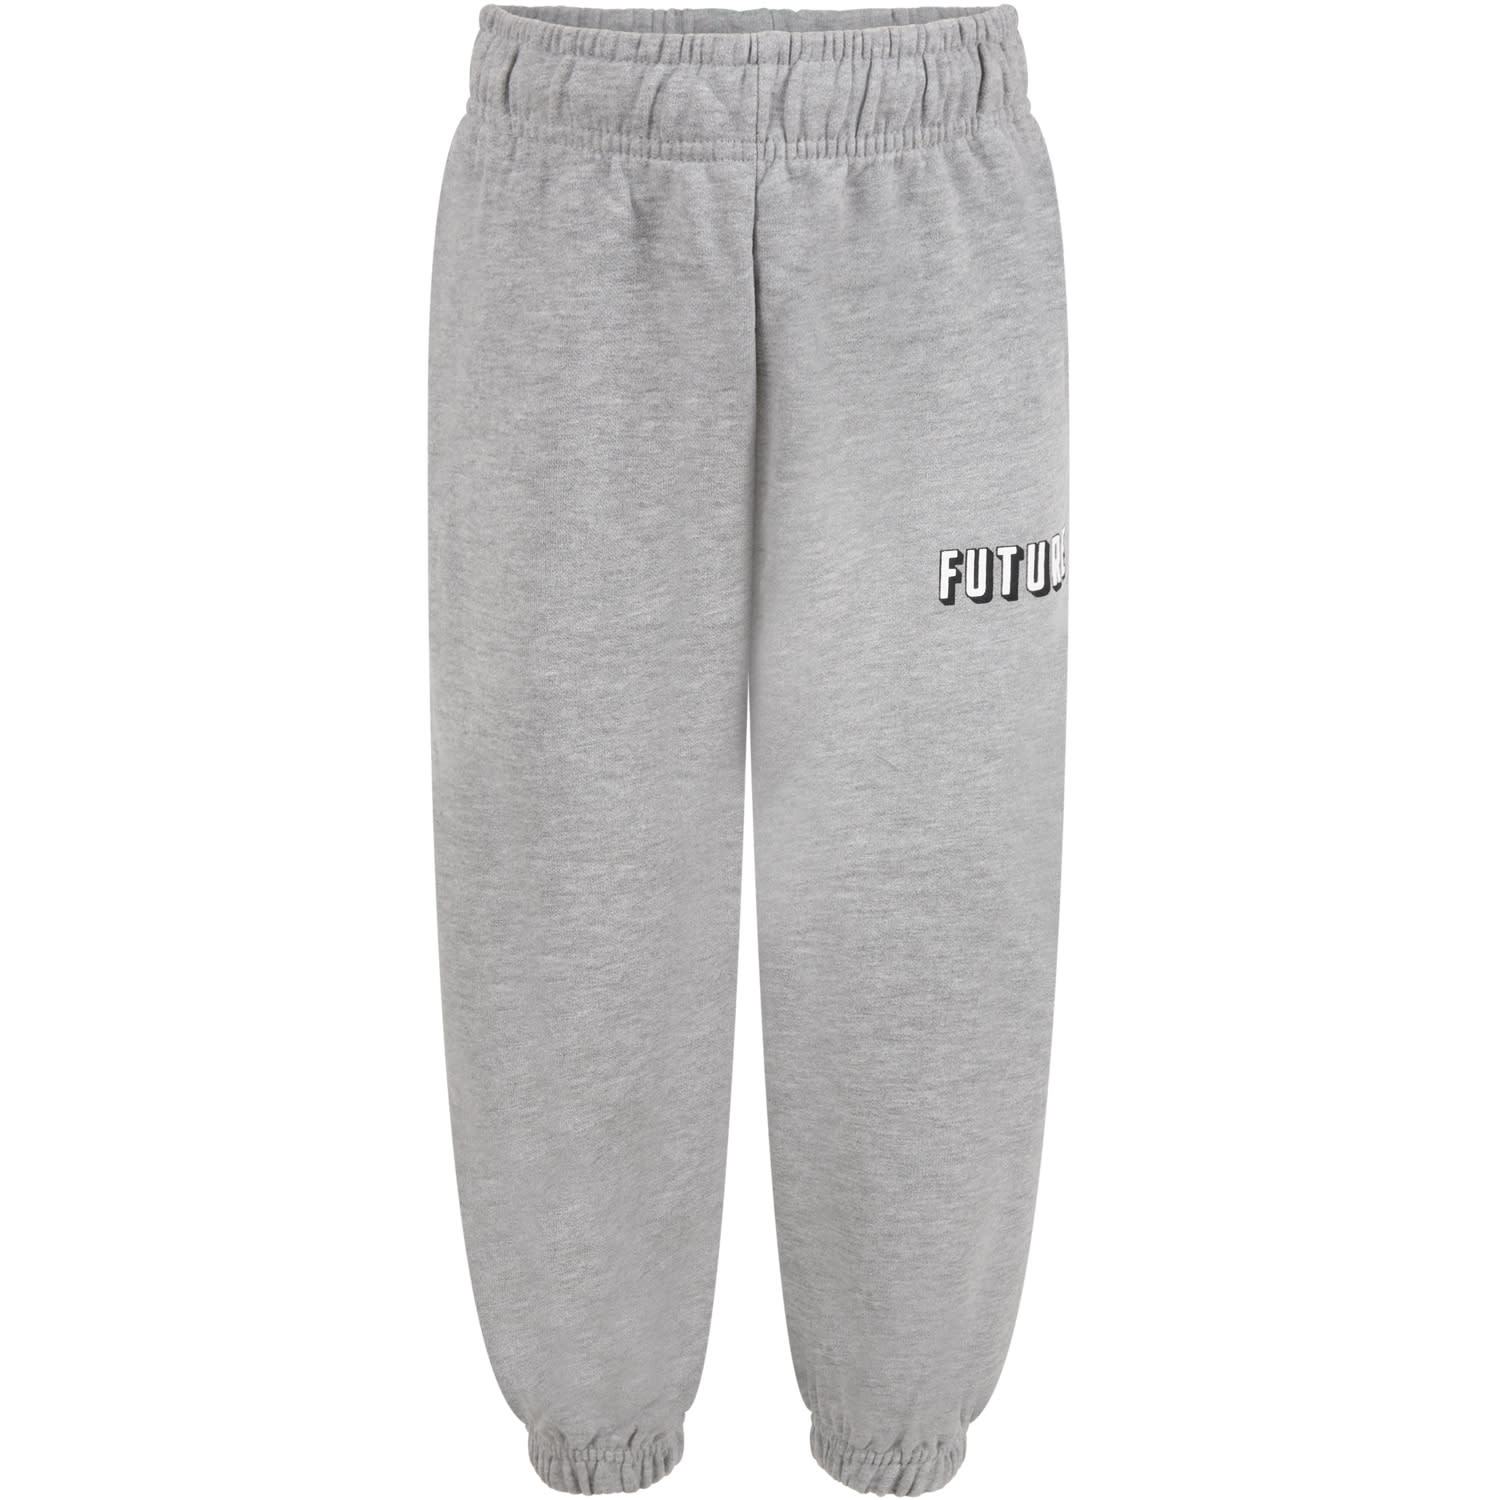 Molo Grey Sweatpant For Kids With Writing